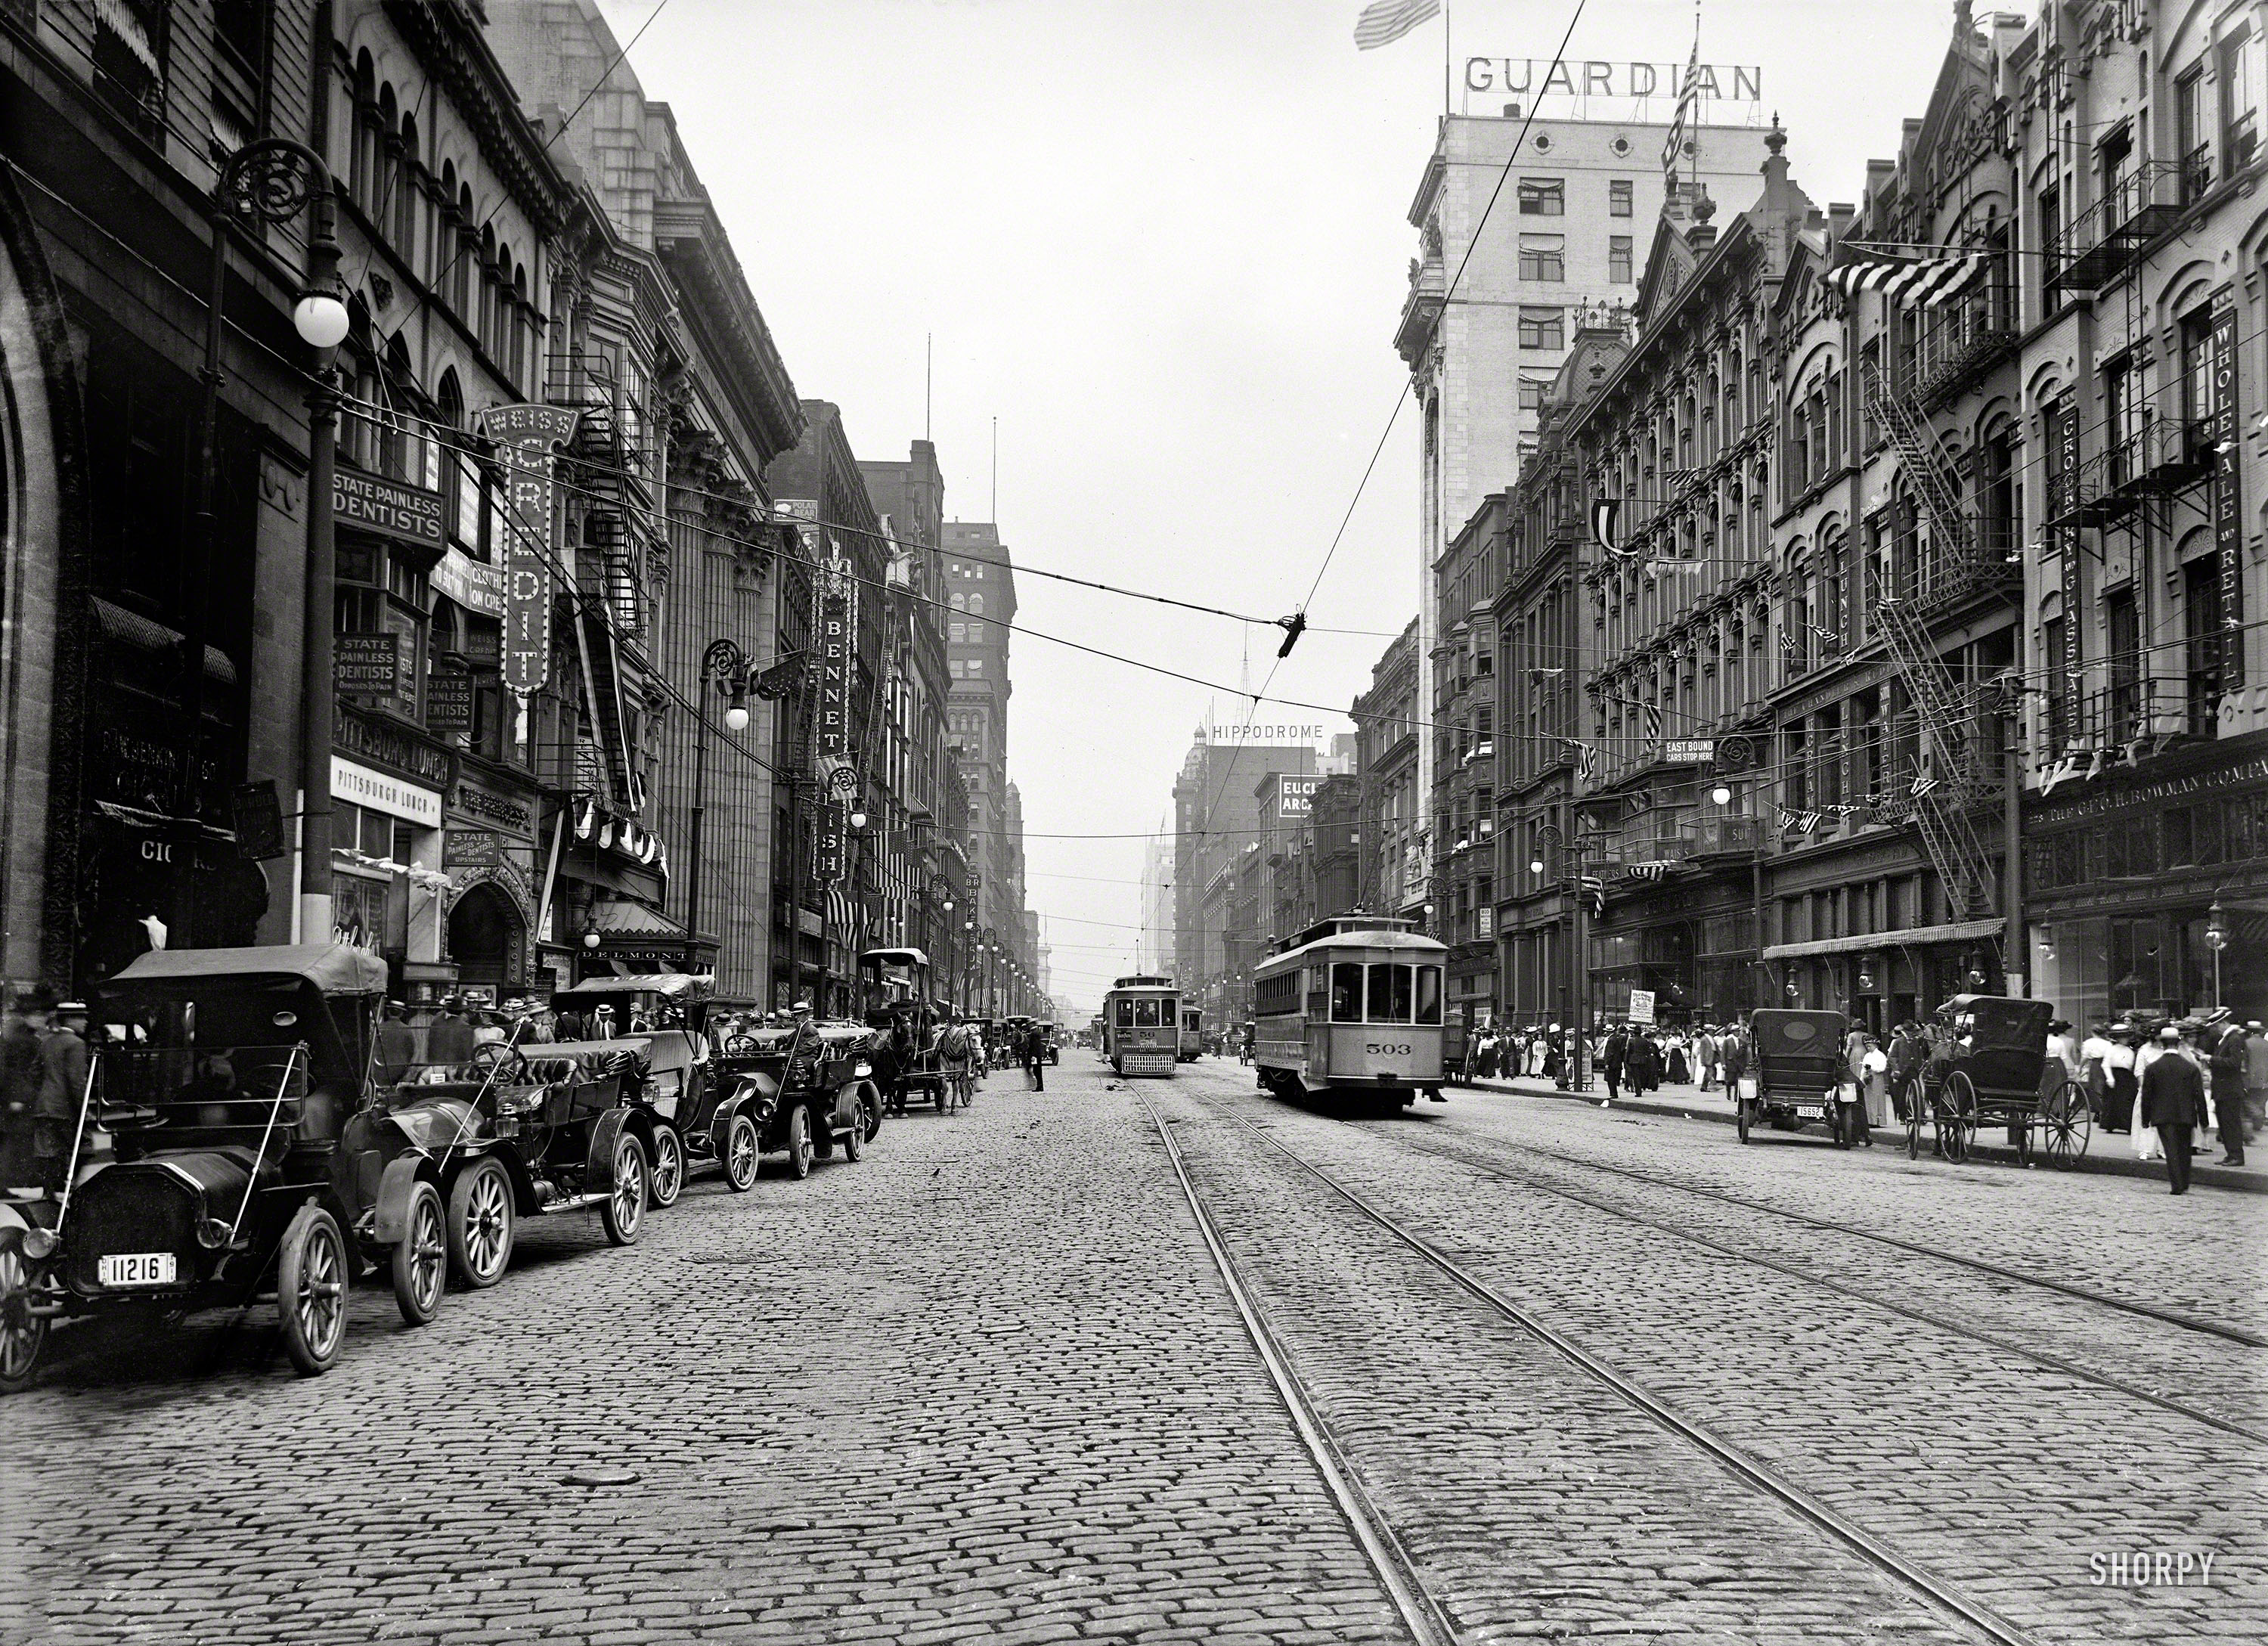 Cleveland, Ohio, in 1911. "Euclid Avenue." Painless dentists and quick-service lunchrooms in easy walking distance. 5x7 glass negative. View full size.